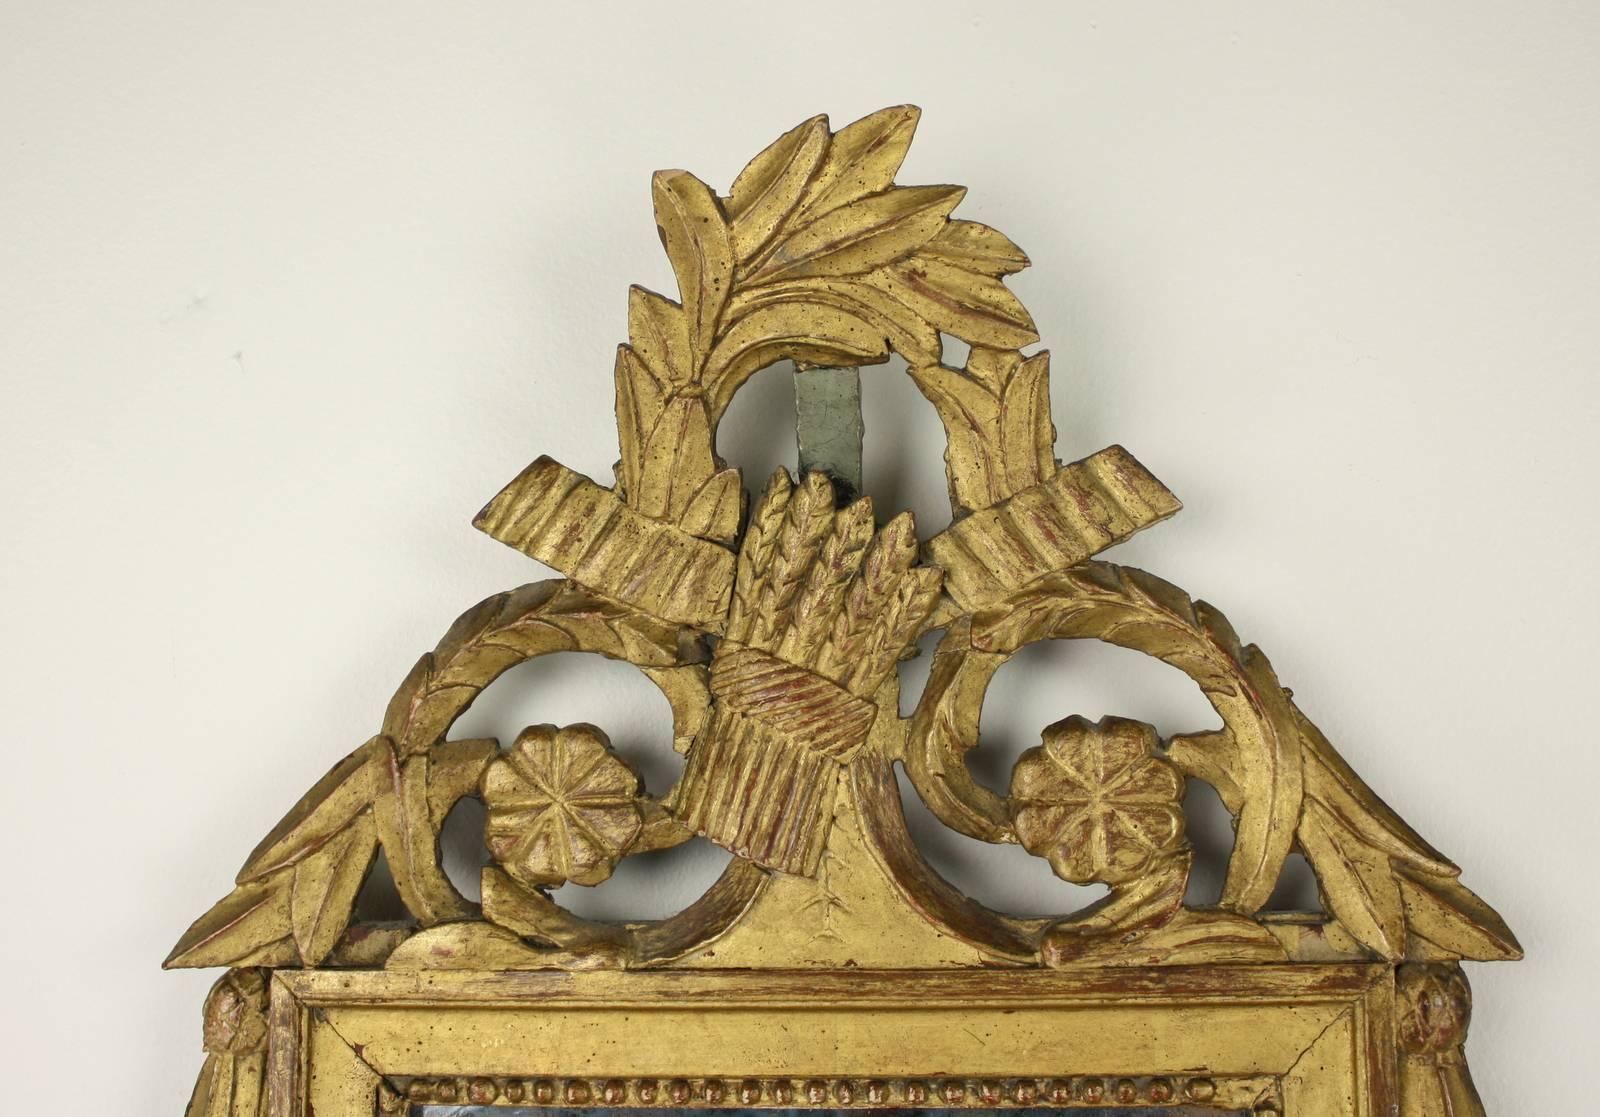 A beautiful mid 18th Century carved and gilded French wall mirror with decorative detail in the shape of a wheat sheaf and classical floral garland. The glass with some spotting a crazing, adds marvelous visual interest. There are some small chips